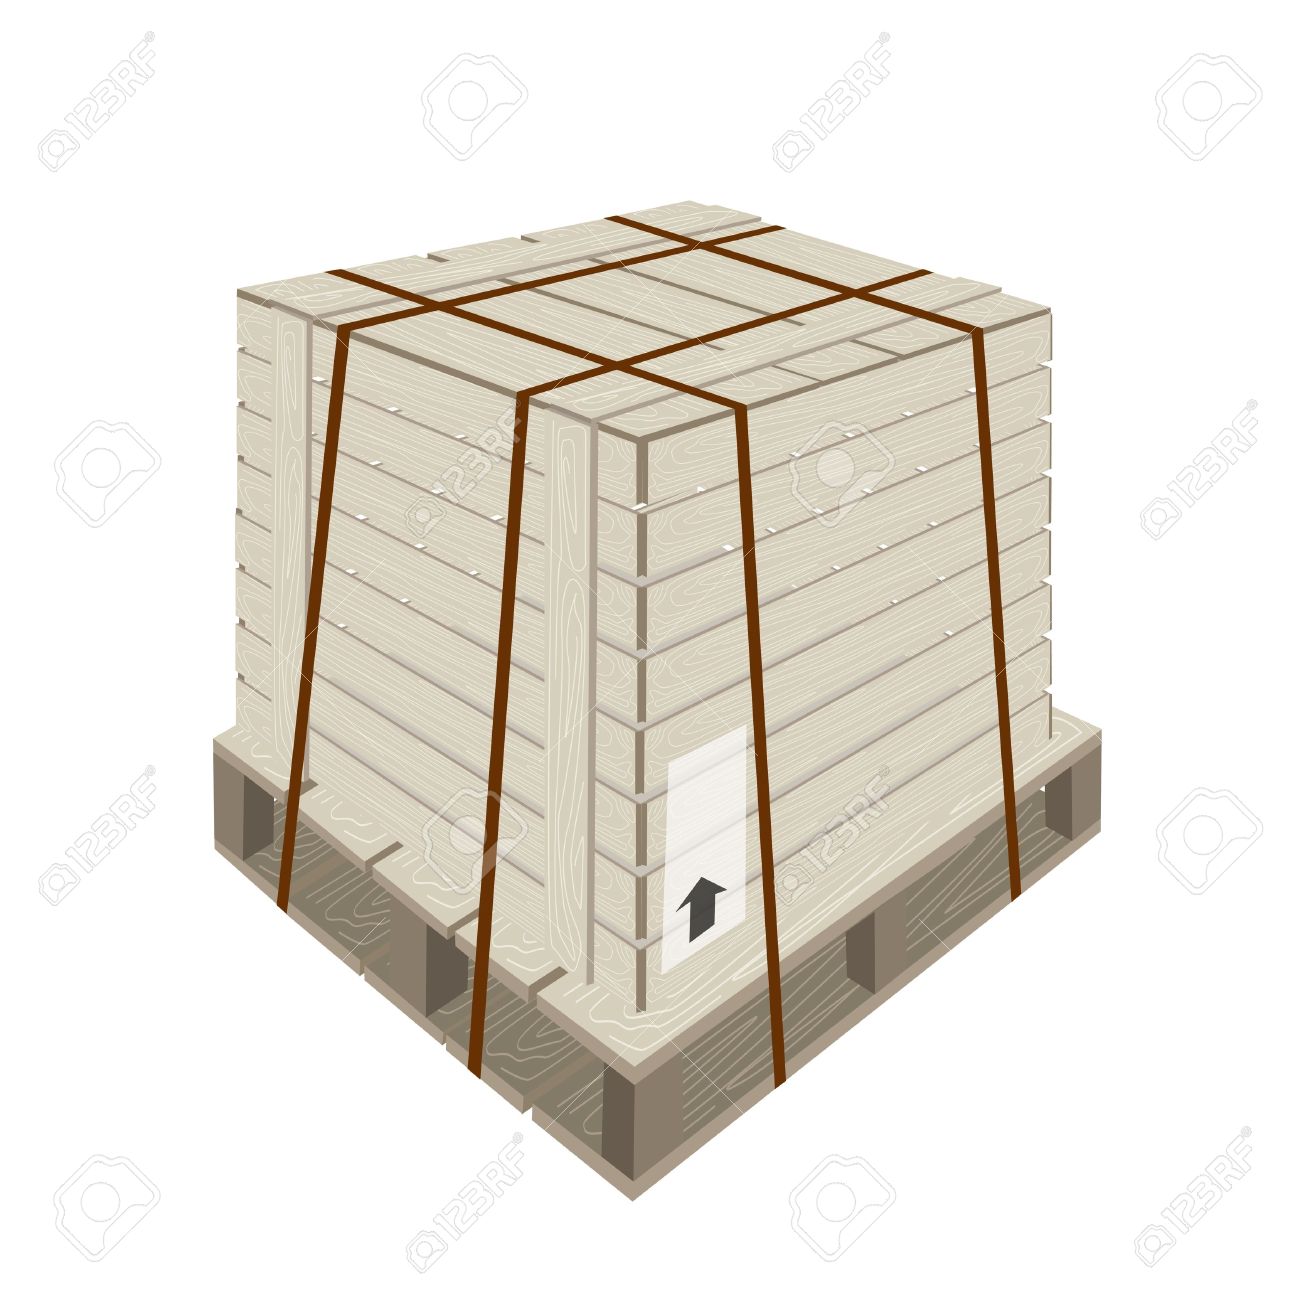 An Illustration Of Wooden Crate Or Cargo Box With Steel Banding.